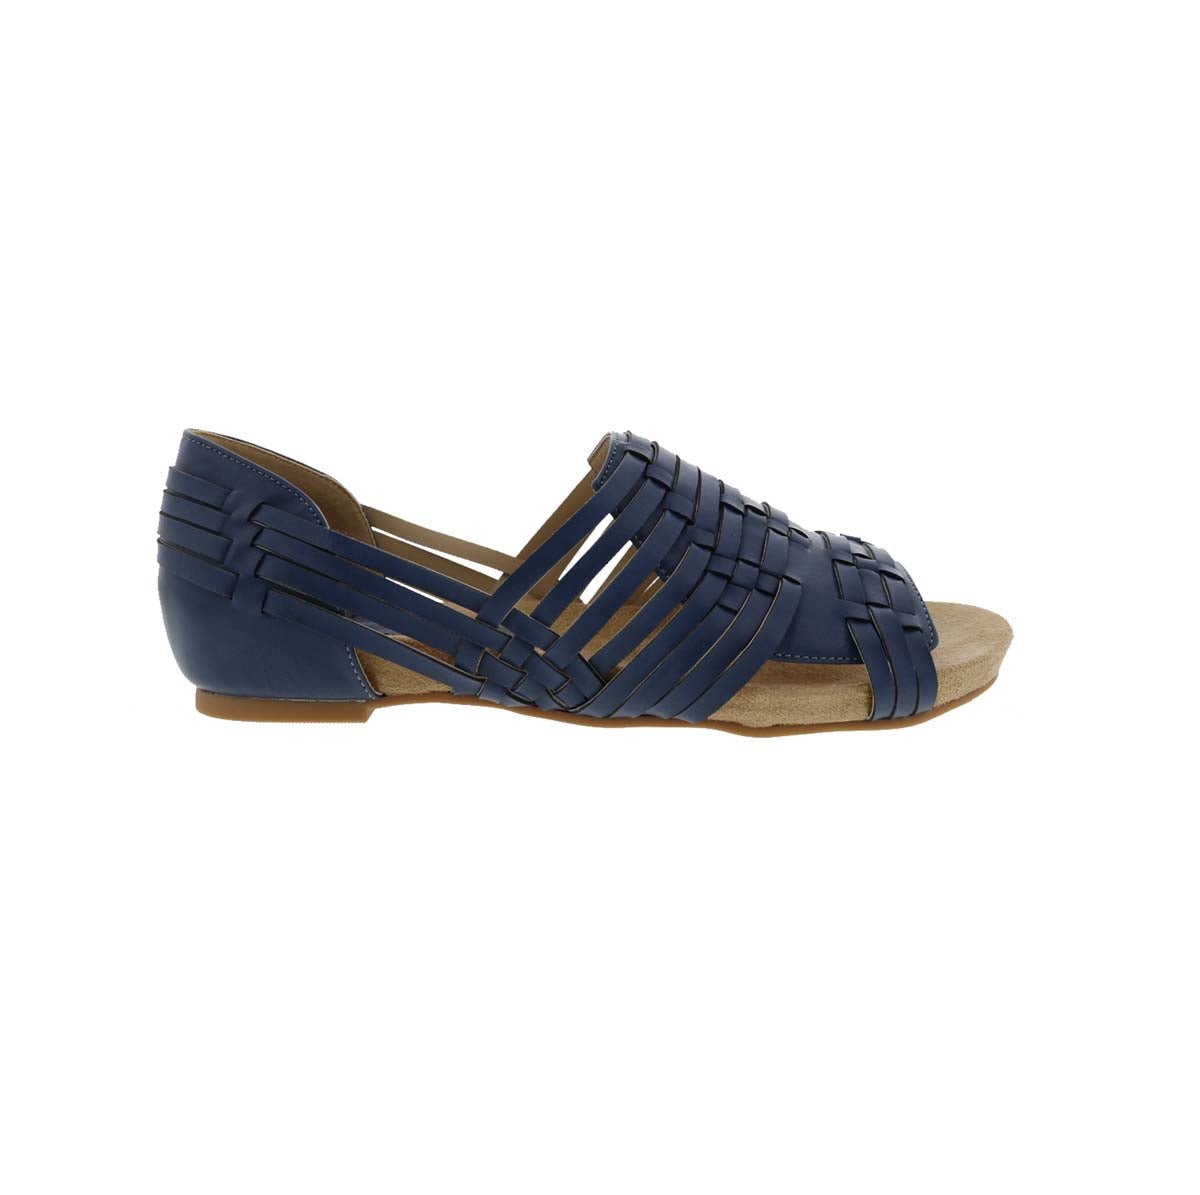 BELLINI NATIVE WOMEN DRESS SANDALS IN BLUE SMOOTH - TLW Shoes